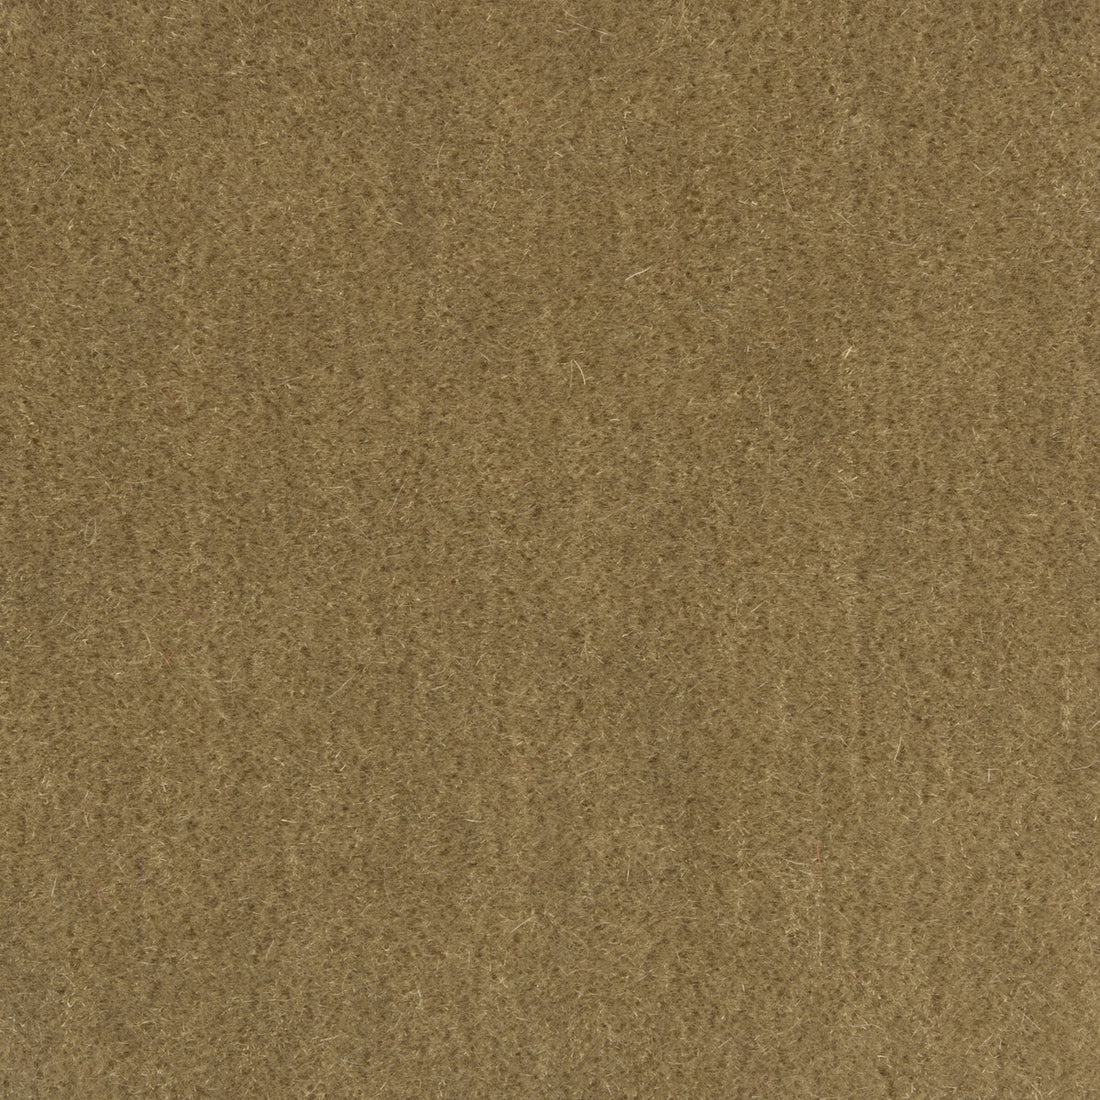 Windsor Mohair fabric in truffle color - pattern 34258.106.0 - by Kravet Couture